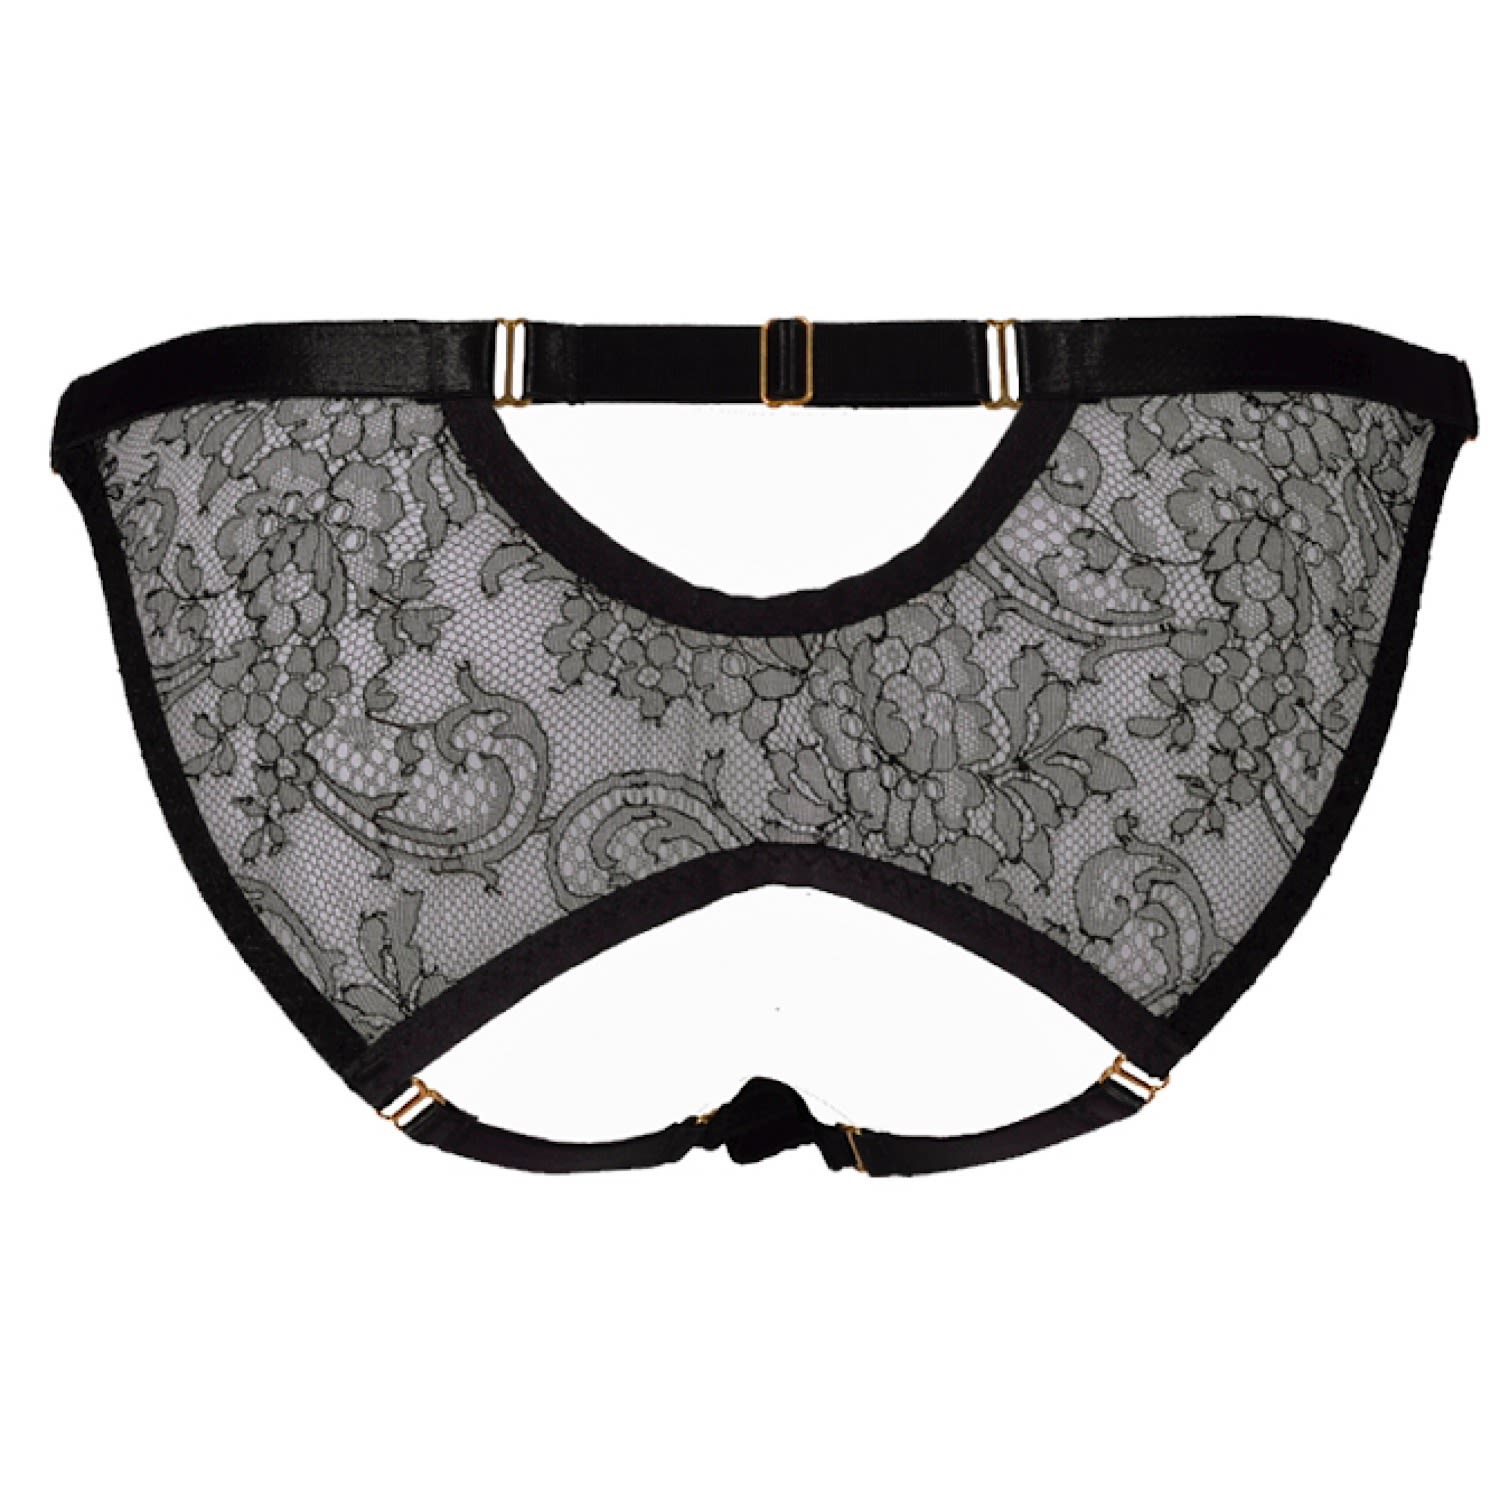 Something Wicked Women's Black Annabel Lace Ouvert Open Brief